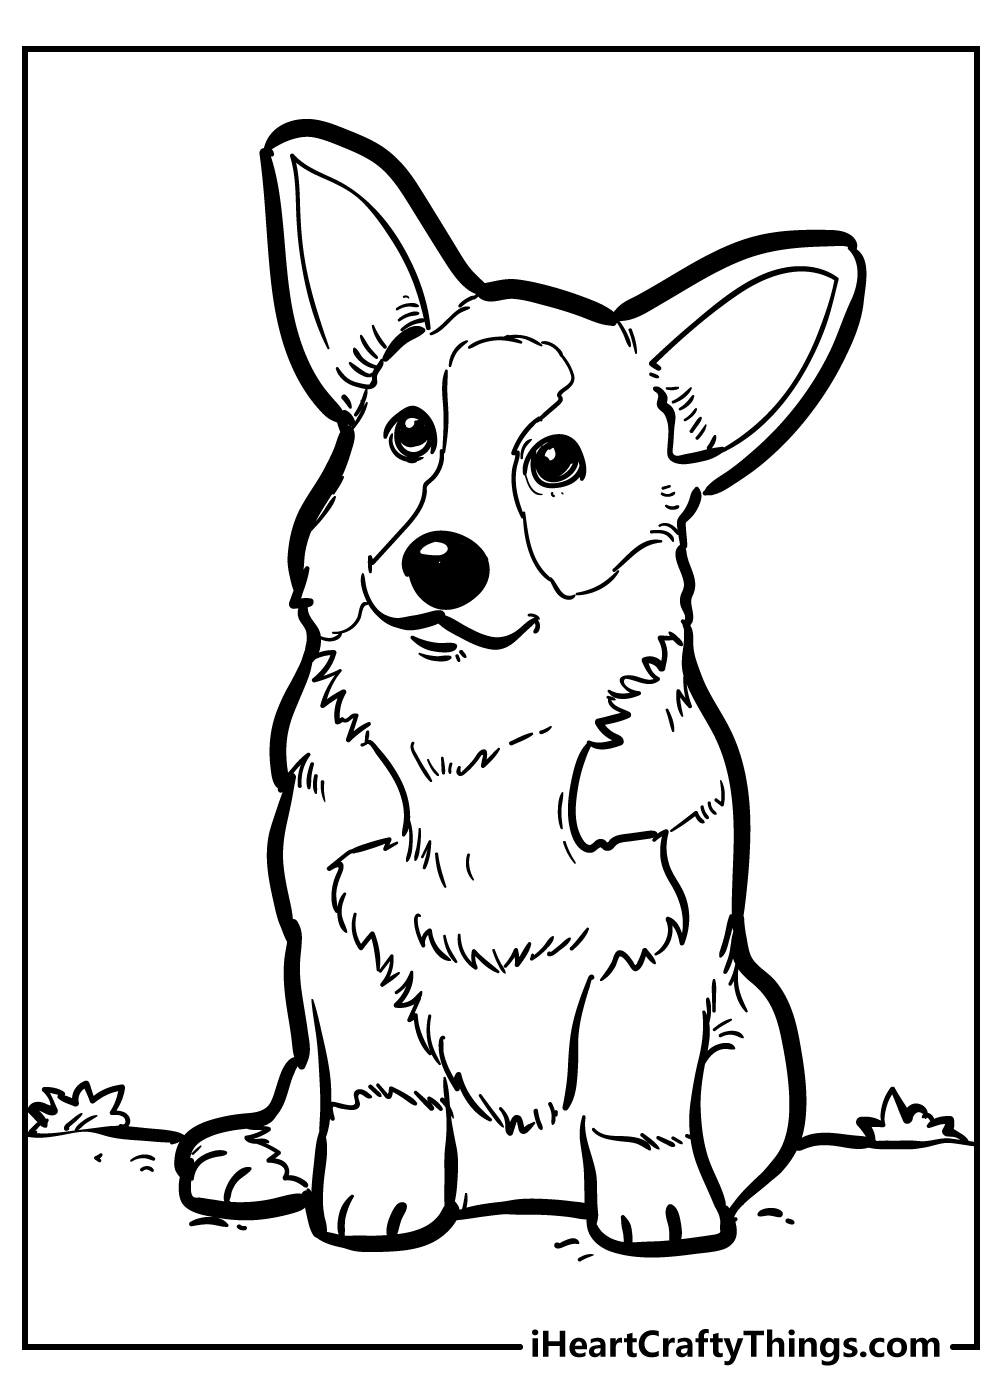 Dog Coloring Pages for preschoolers free printable